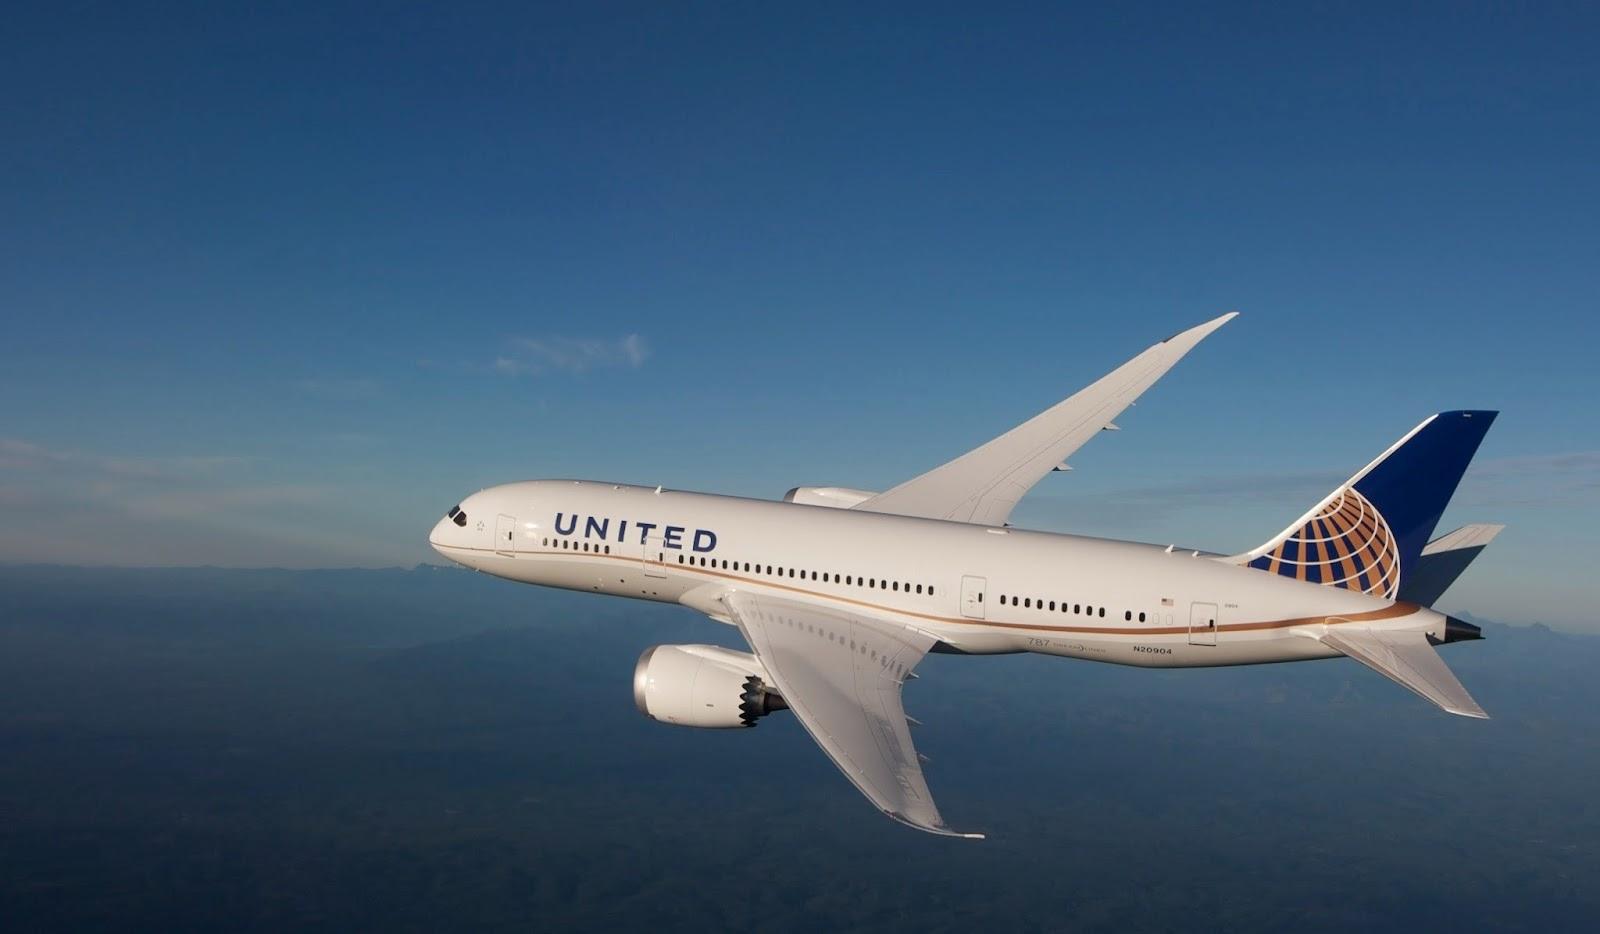 United Airlines Boeing 787 9 Dreamliner Inflight. Aircraft